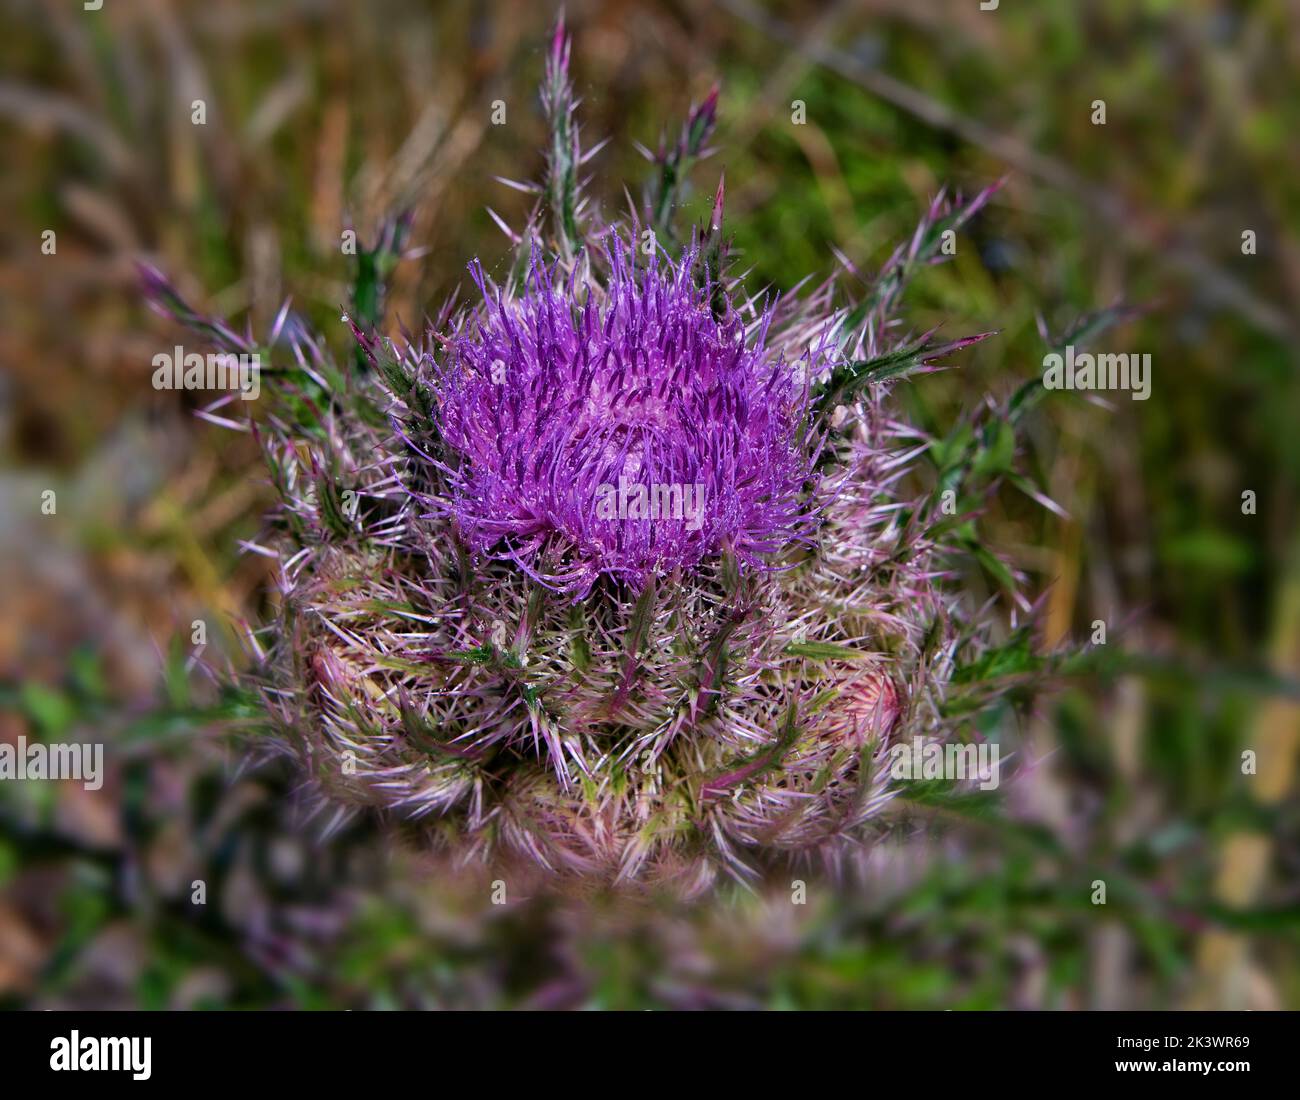 Thistle flower, violet or purple flowers with prickly and thorny leaves. Stock Photo